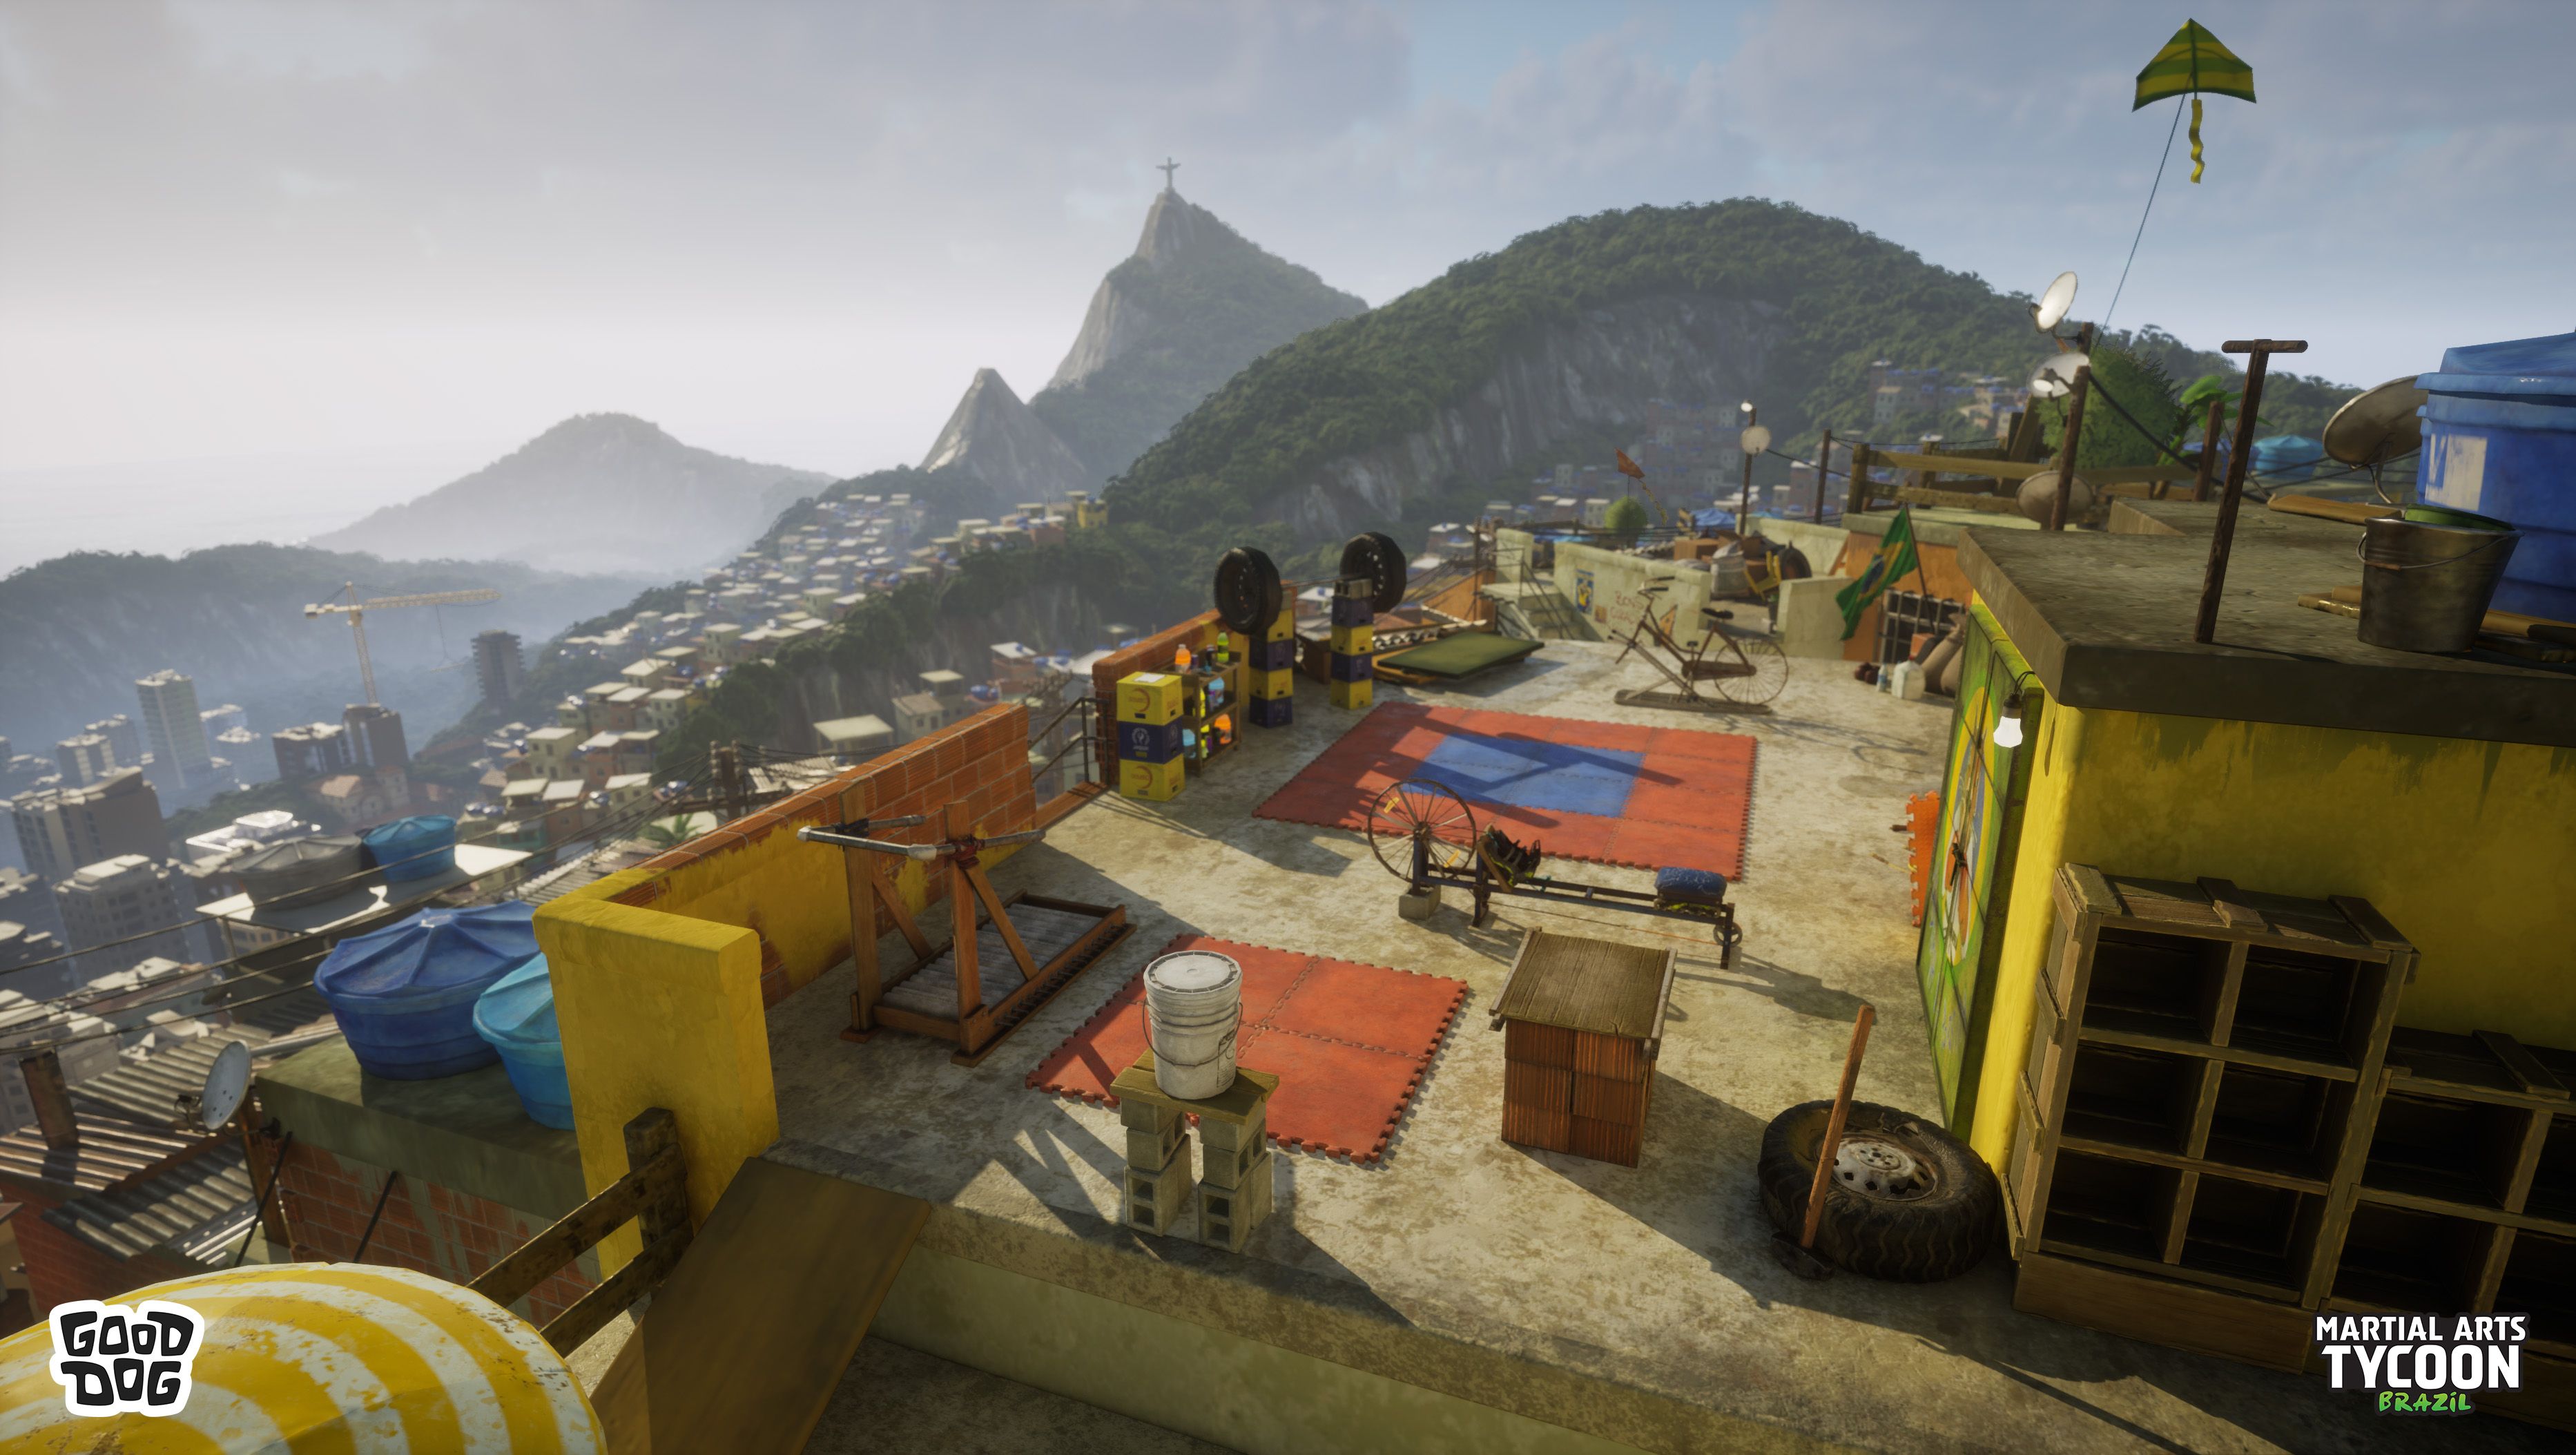 Martial Arts Tycoon rooftop gym overlooking the favela.